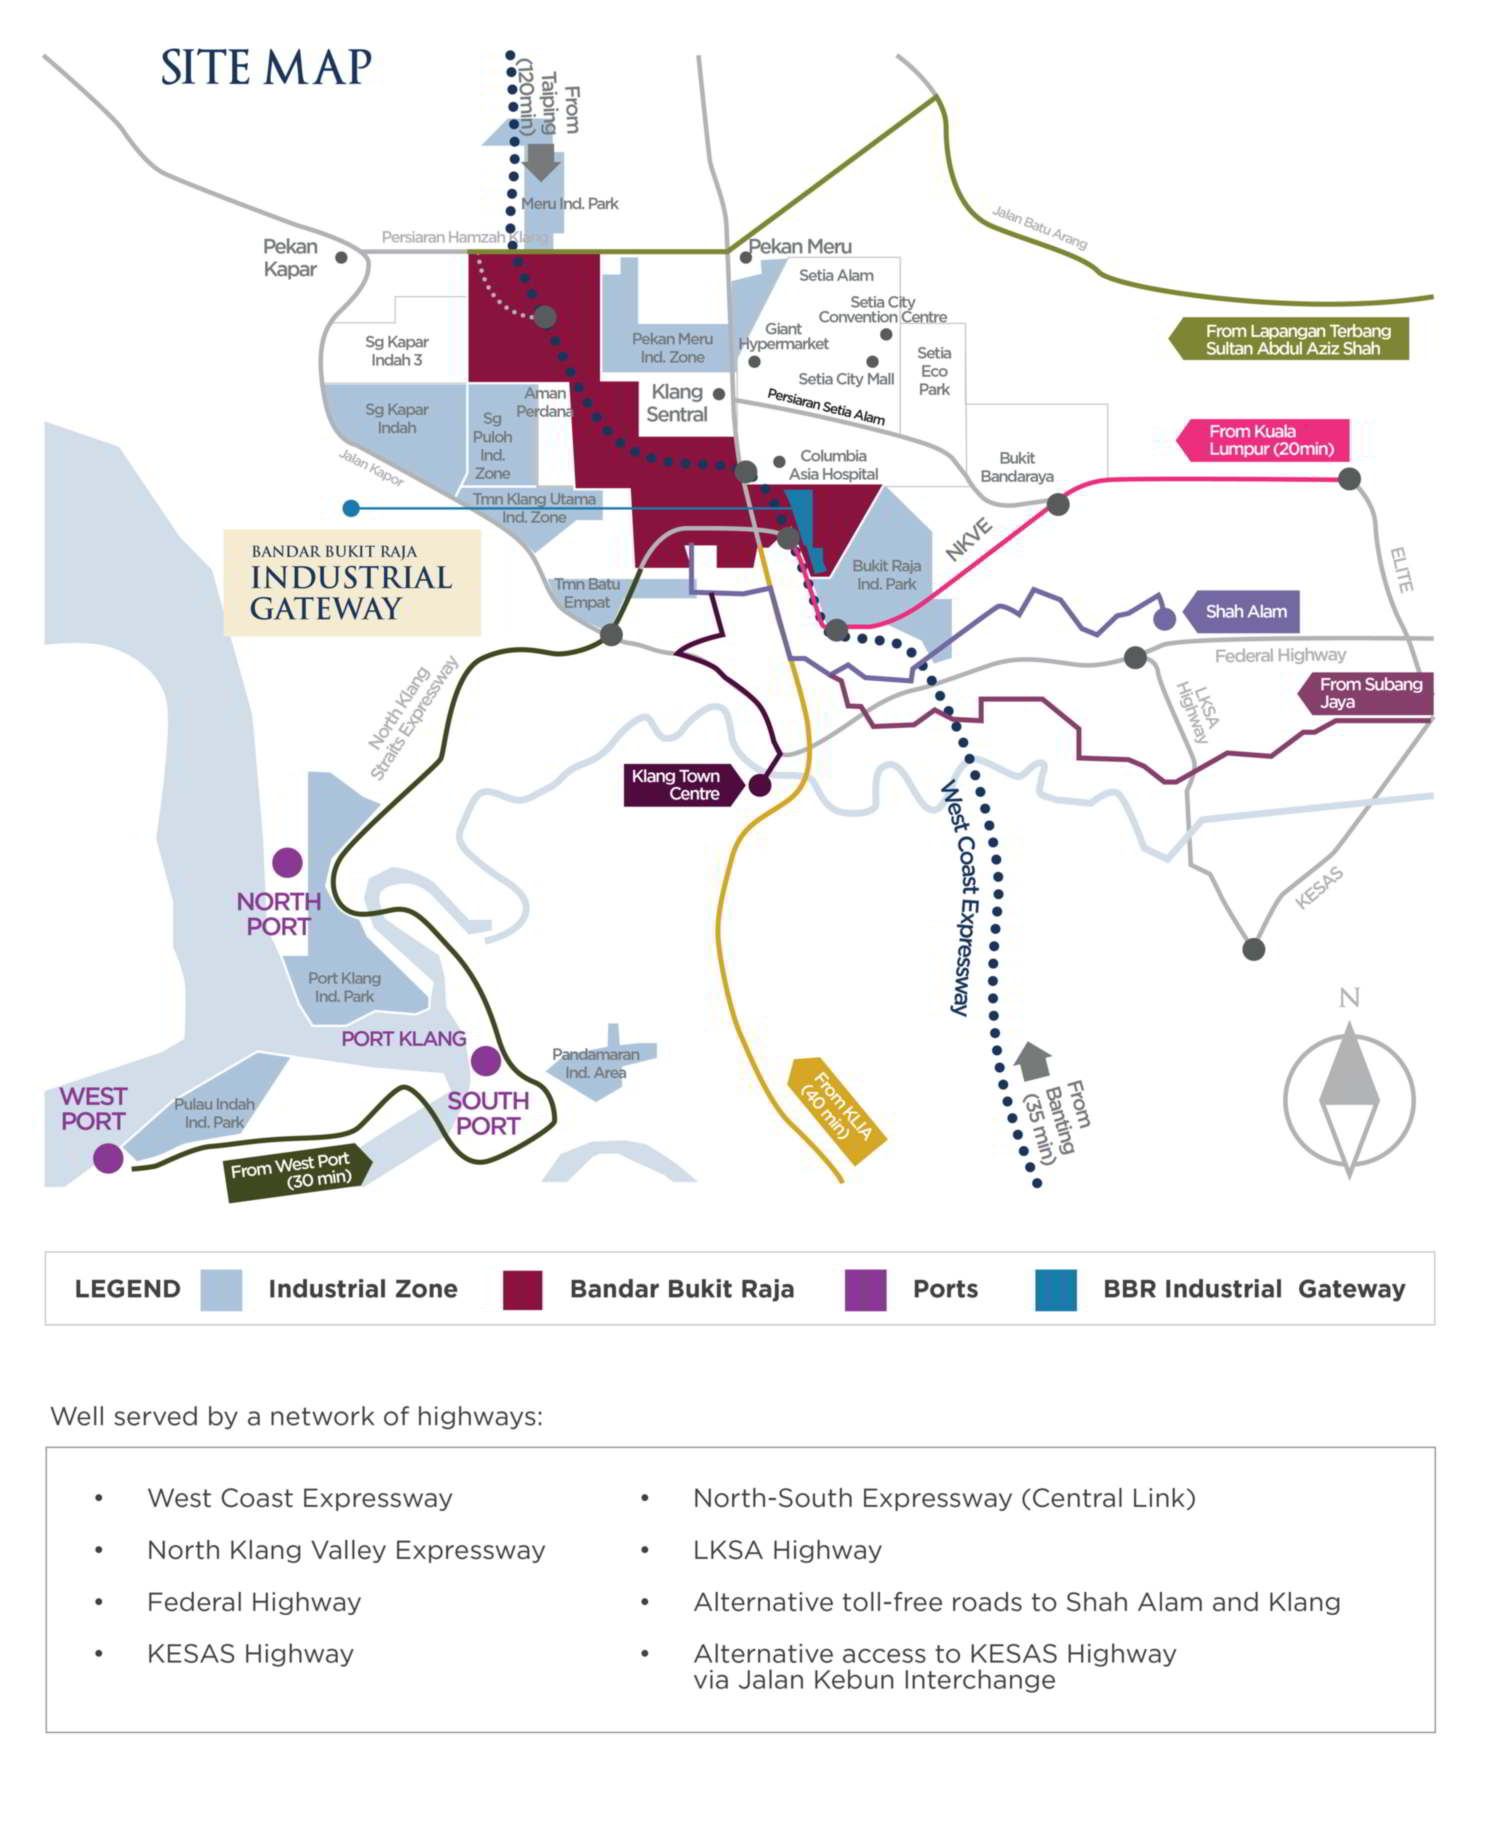 sime-darby-bbr-site-map-new